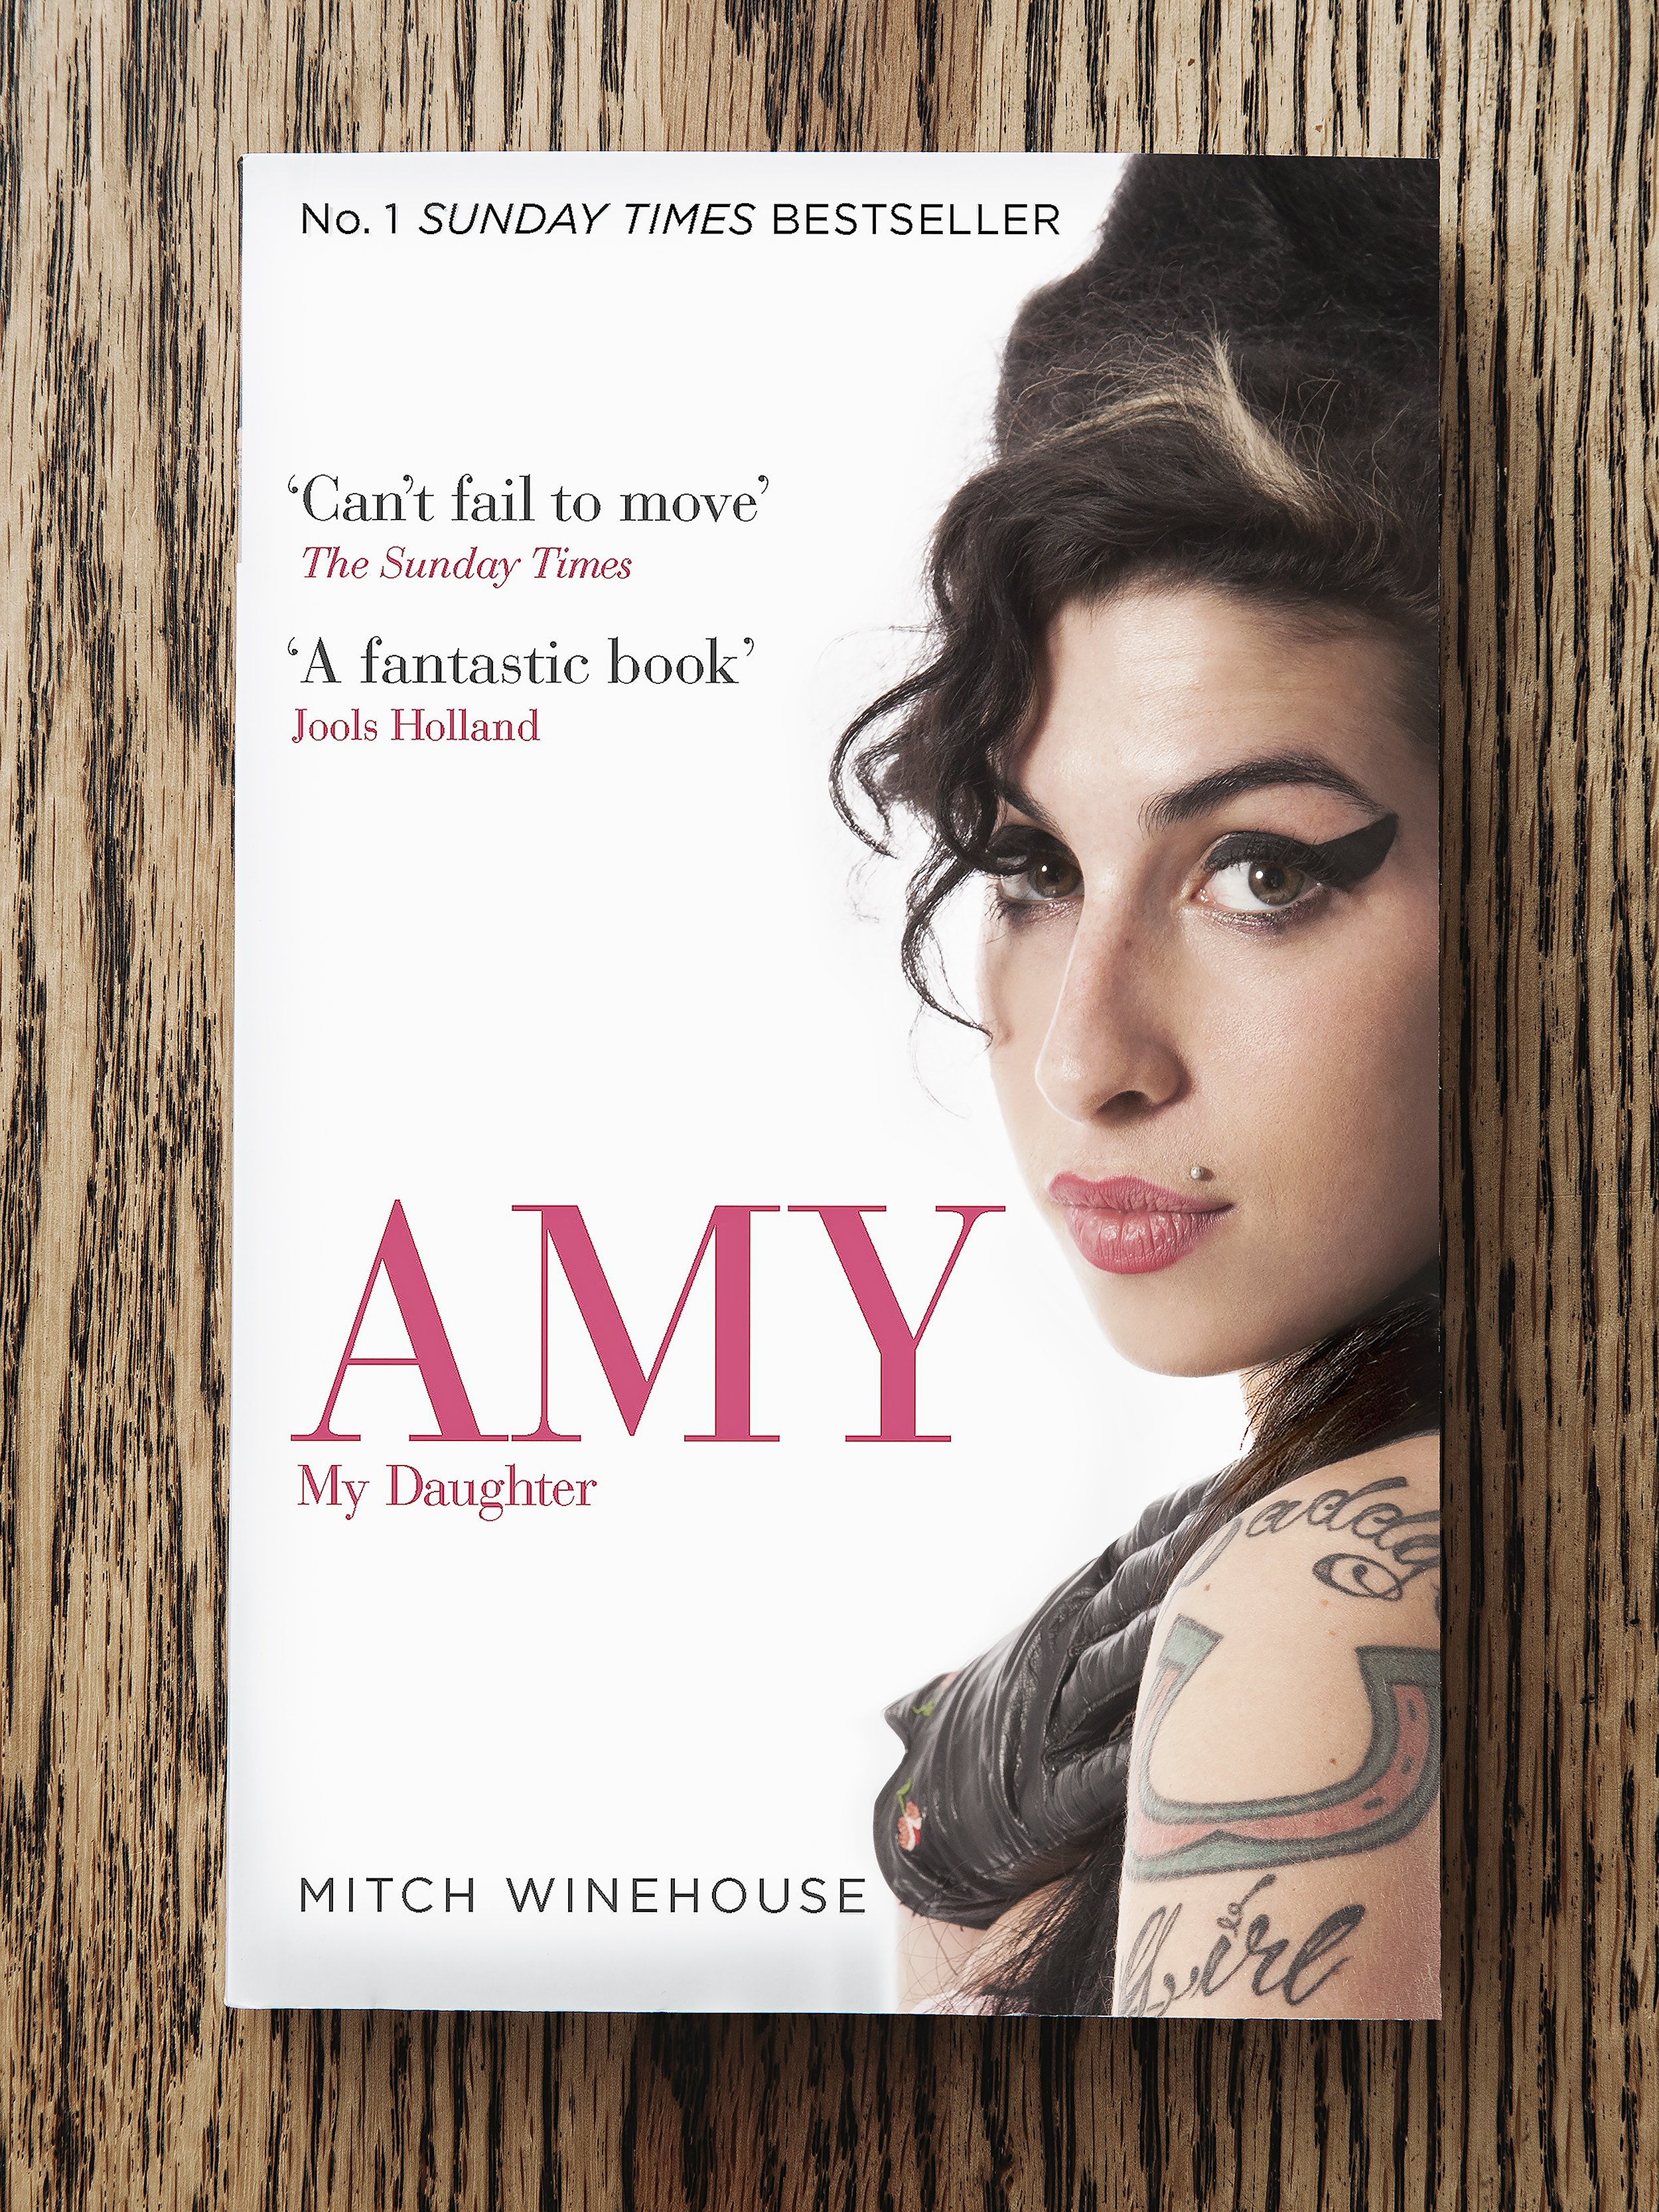  Amy Winehouse Book: Amy, My Daughter by Mitch Winehouse 